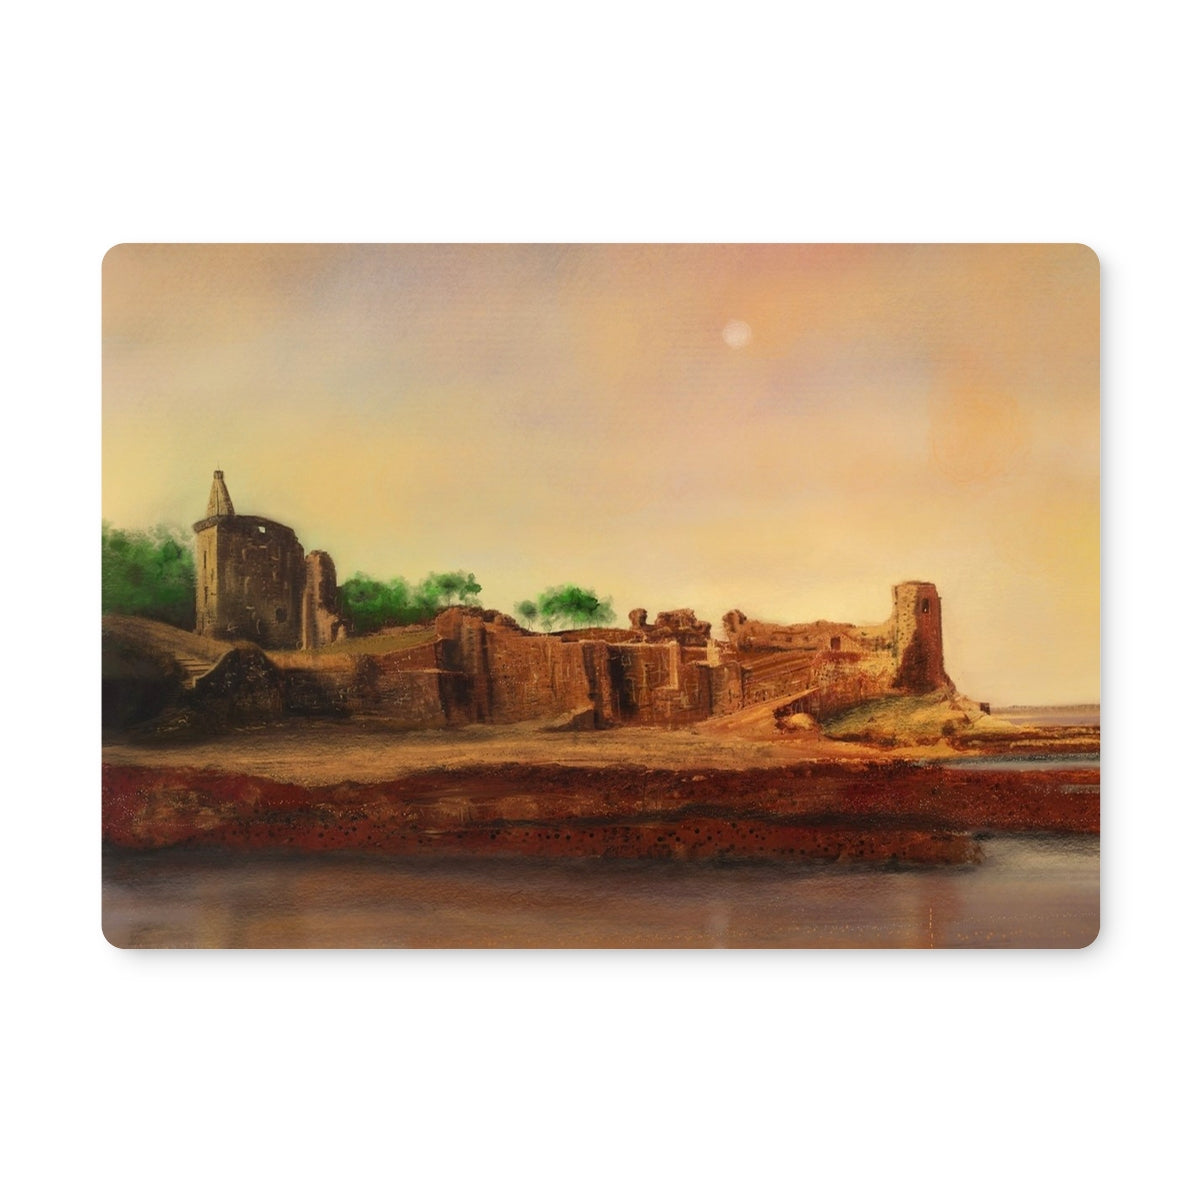 St Andrews Castle Art Gifts Placemat-Placemats-Historic & Iconic Scotland Art Gallery-4 Placemats-Paintings, Prints, Homeware, Art Gifts From Scotland By Scottish Artist Kevin Hunter